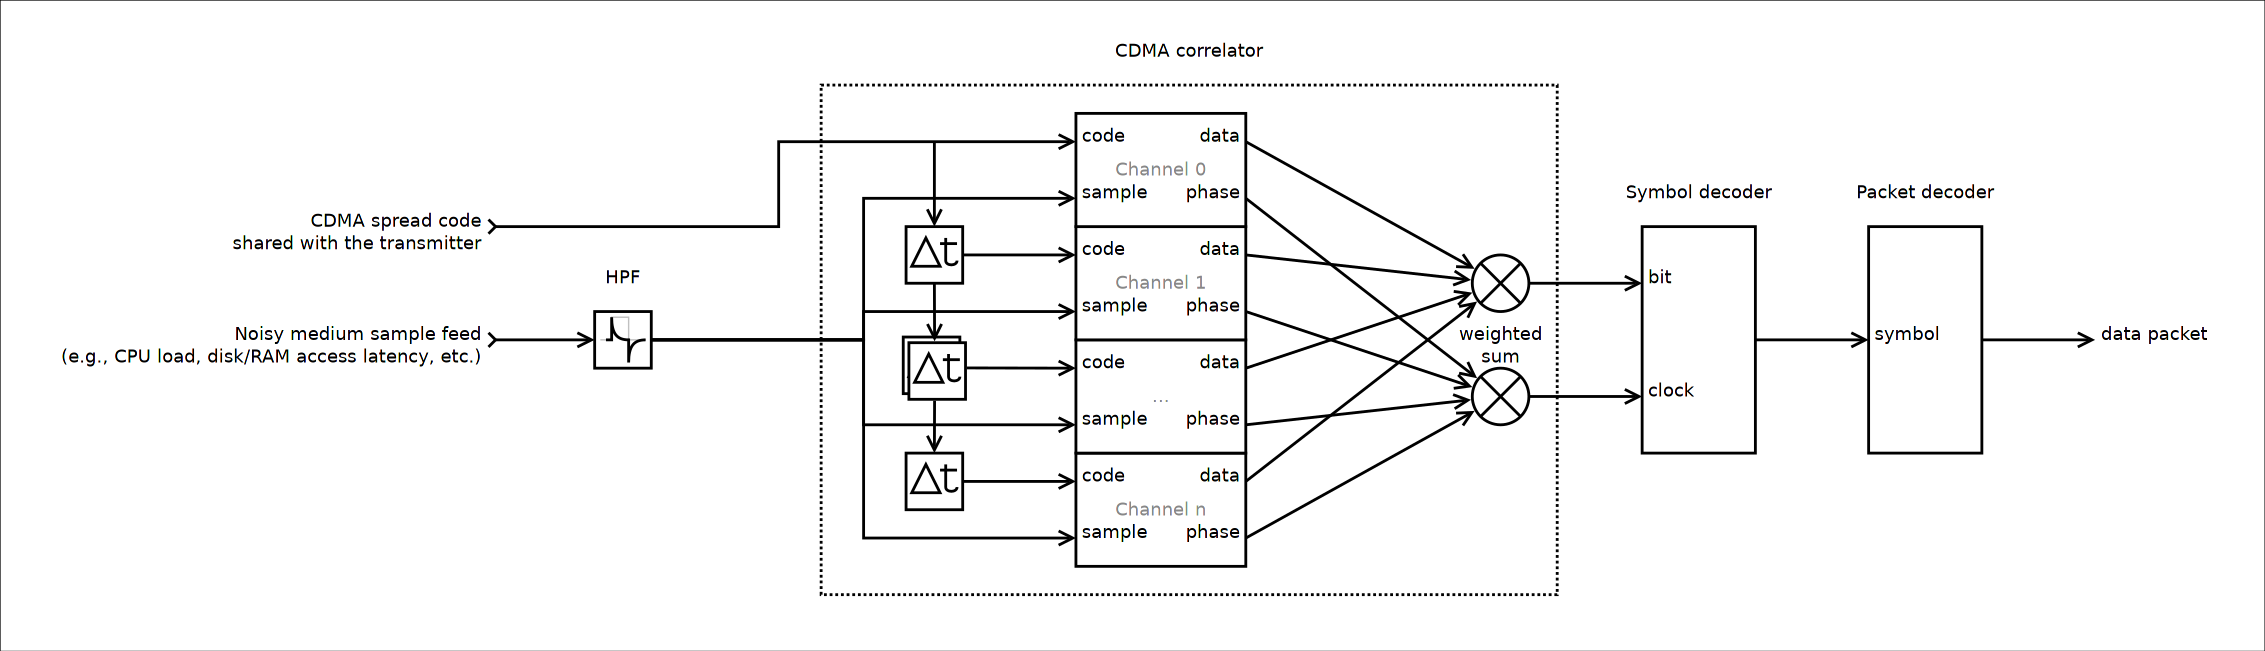 cpu-load-side-channel